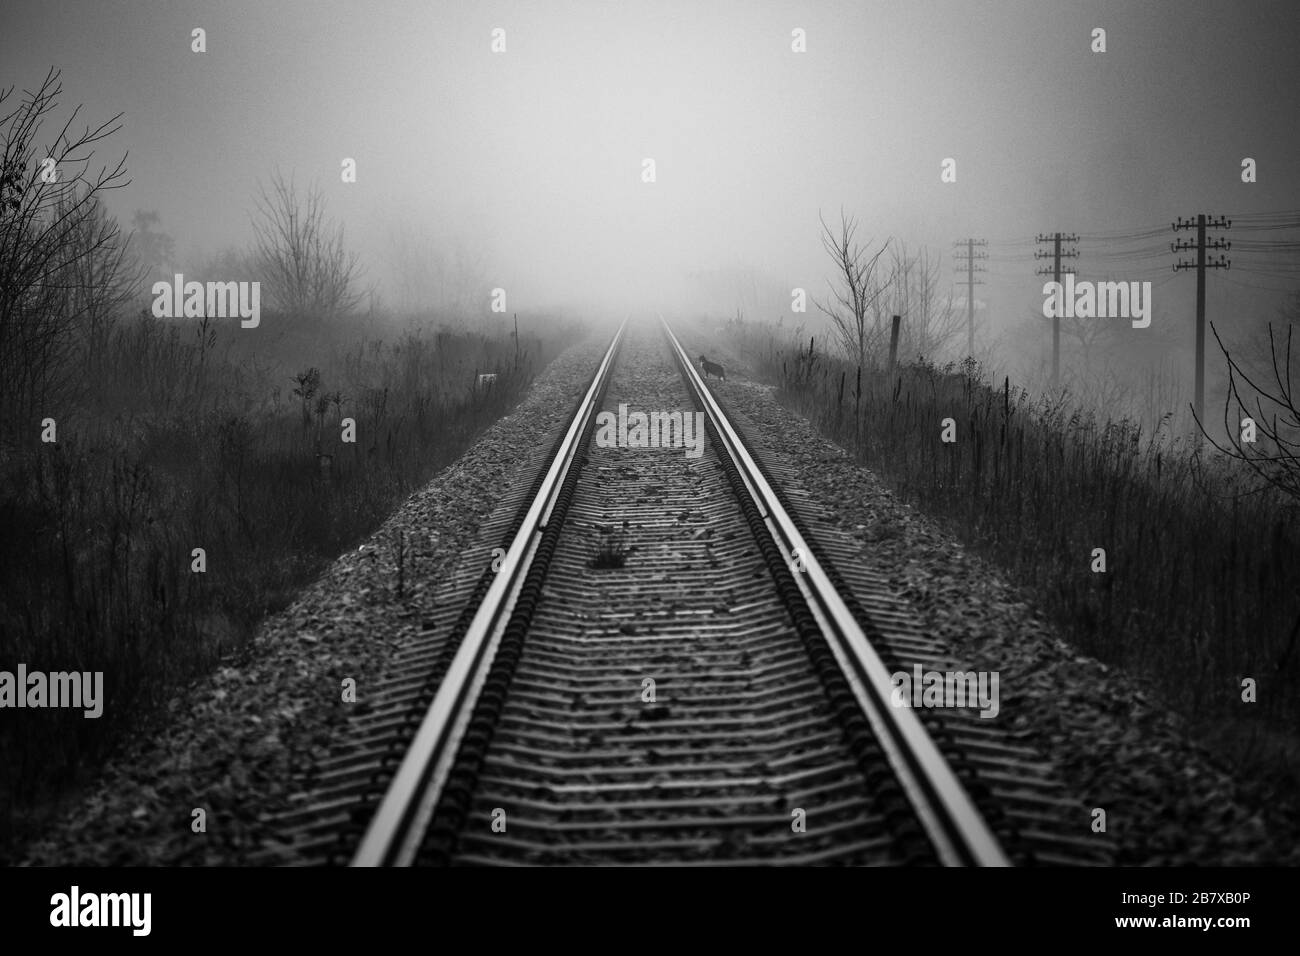 Perspective of railway track disappearing in mist in foggy morning with cat in distance trying to cross rail line - monochrome image Stock Photo